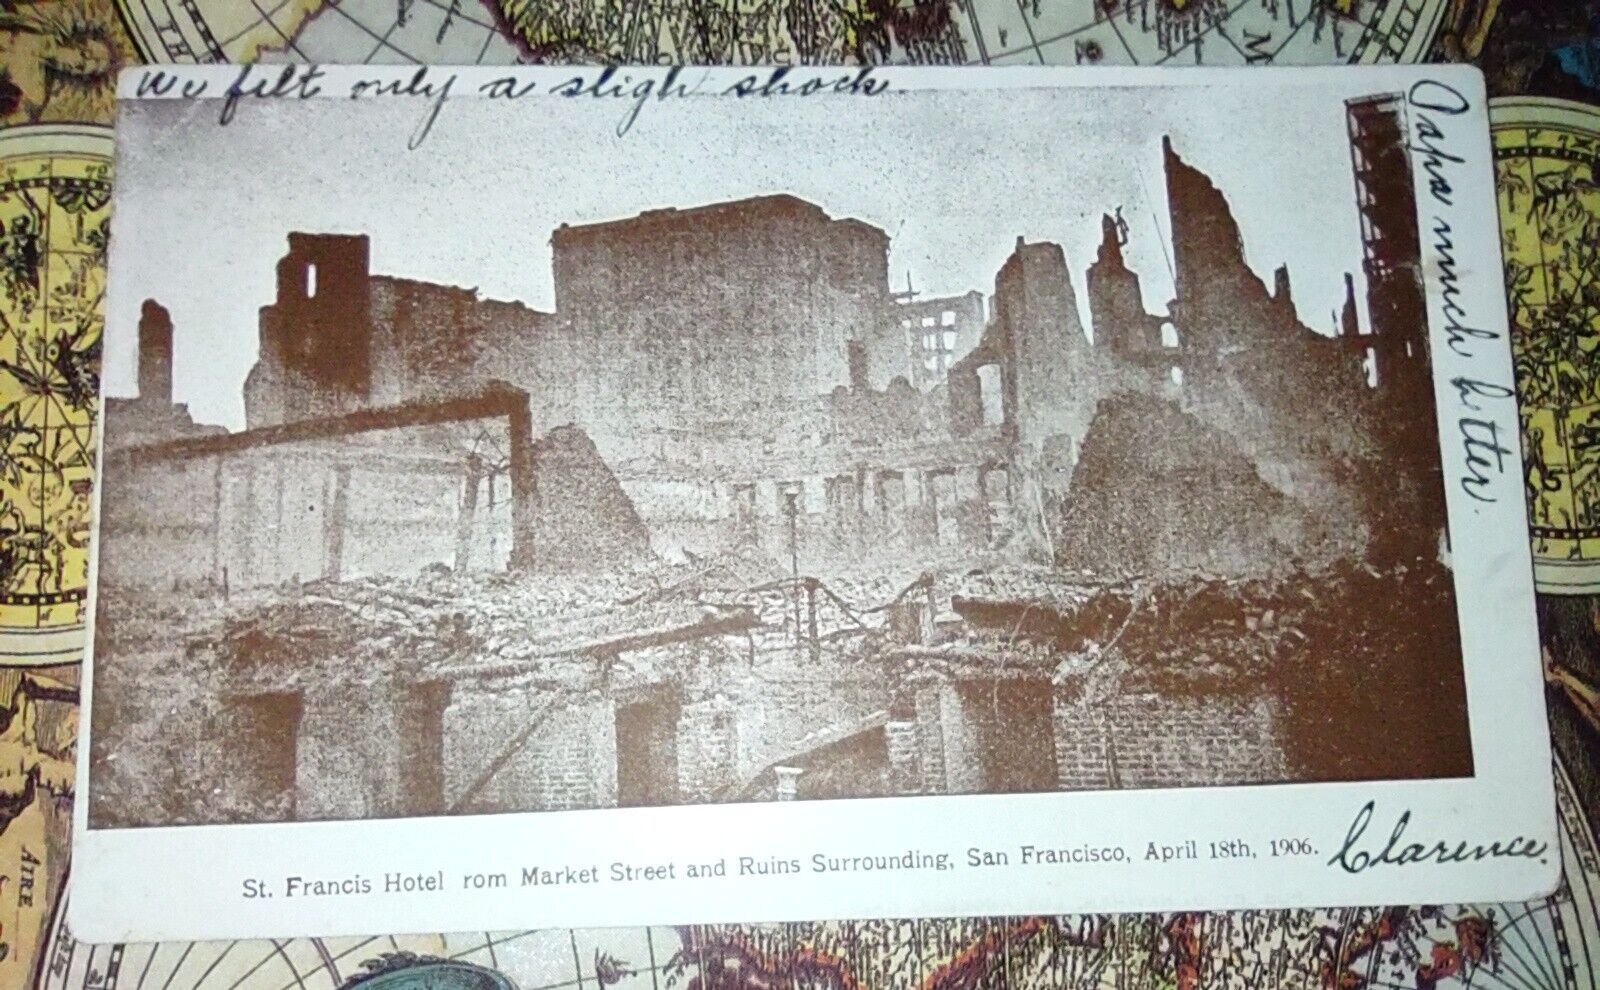  POSTCARD POSTED 16 DAYS AFTER 1906 S.F. EARTHQUAKE IN L.A.  \